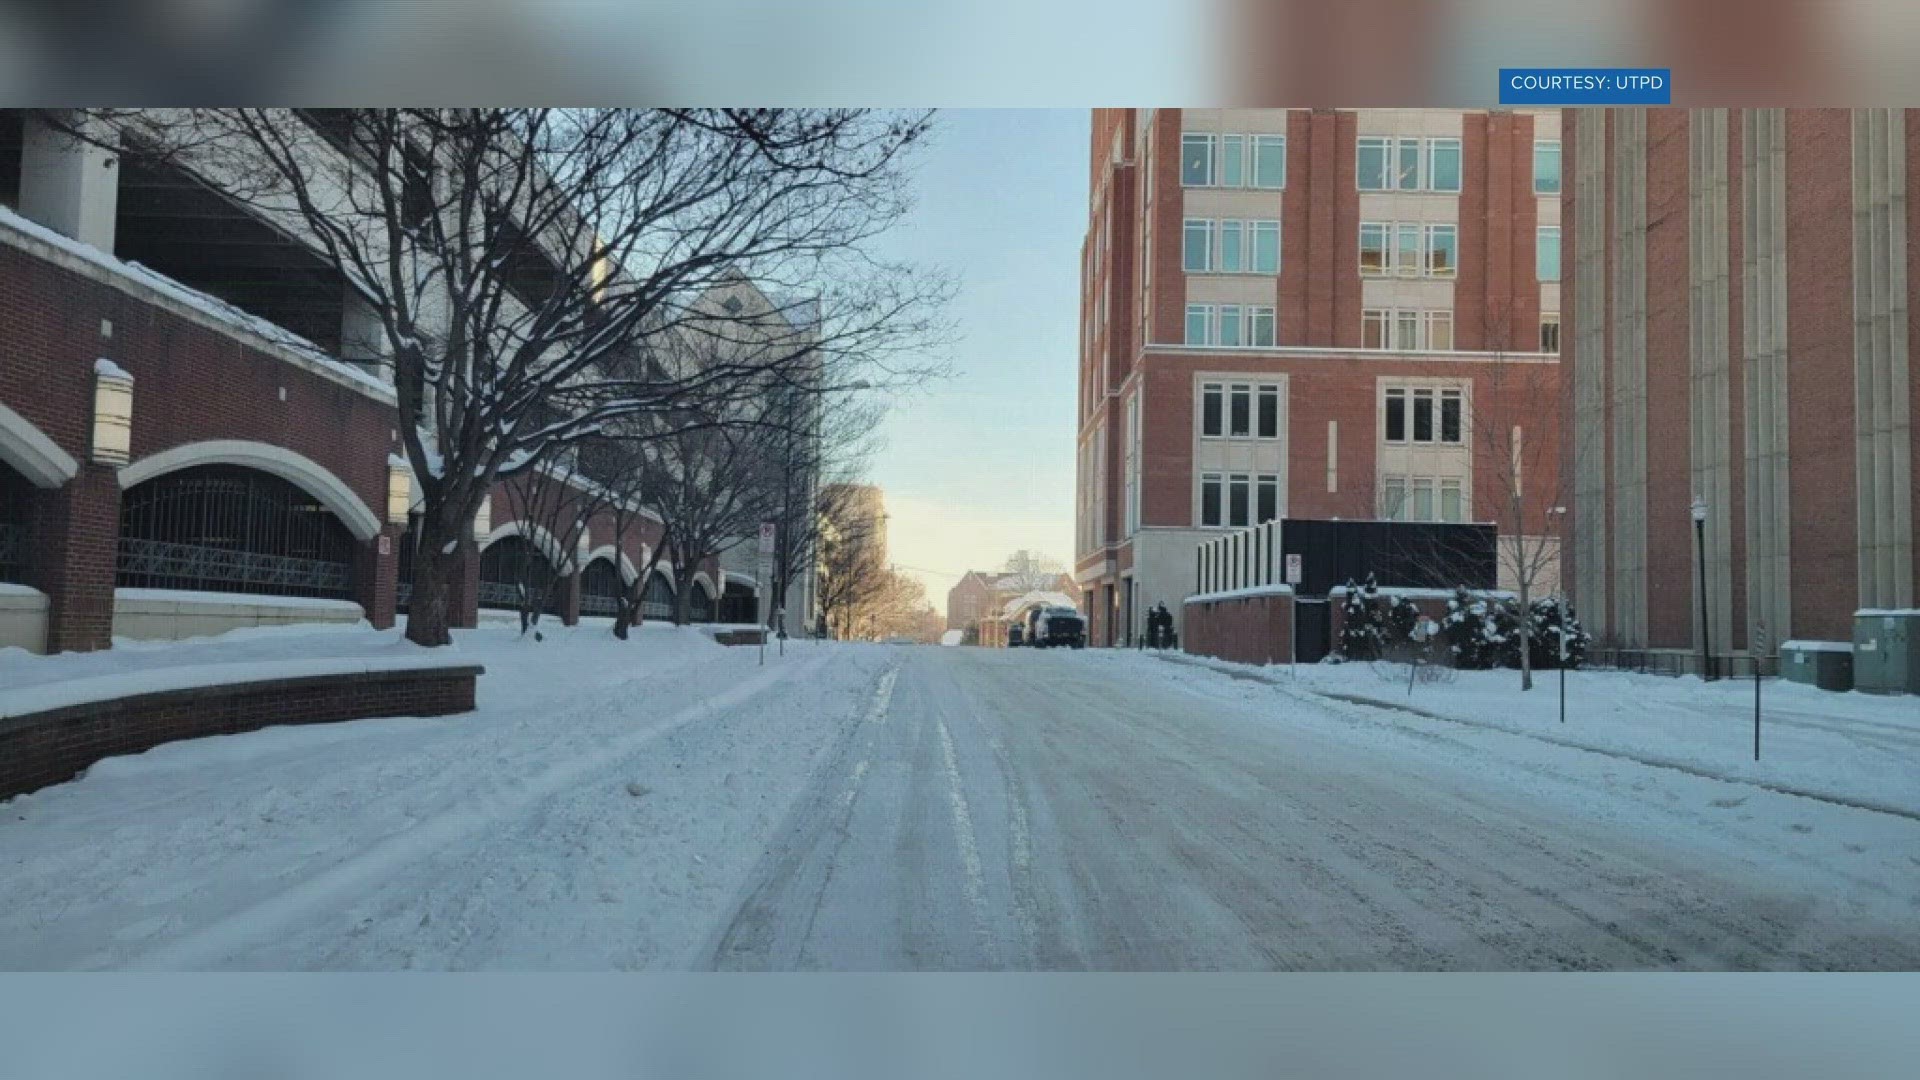 Students are expected to move in for the spring semester tomorrow. We've reached out to find out if that is still happening.